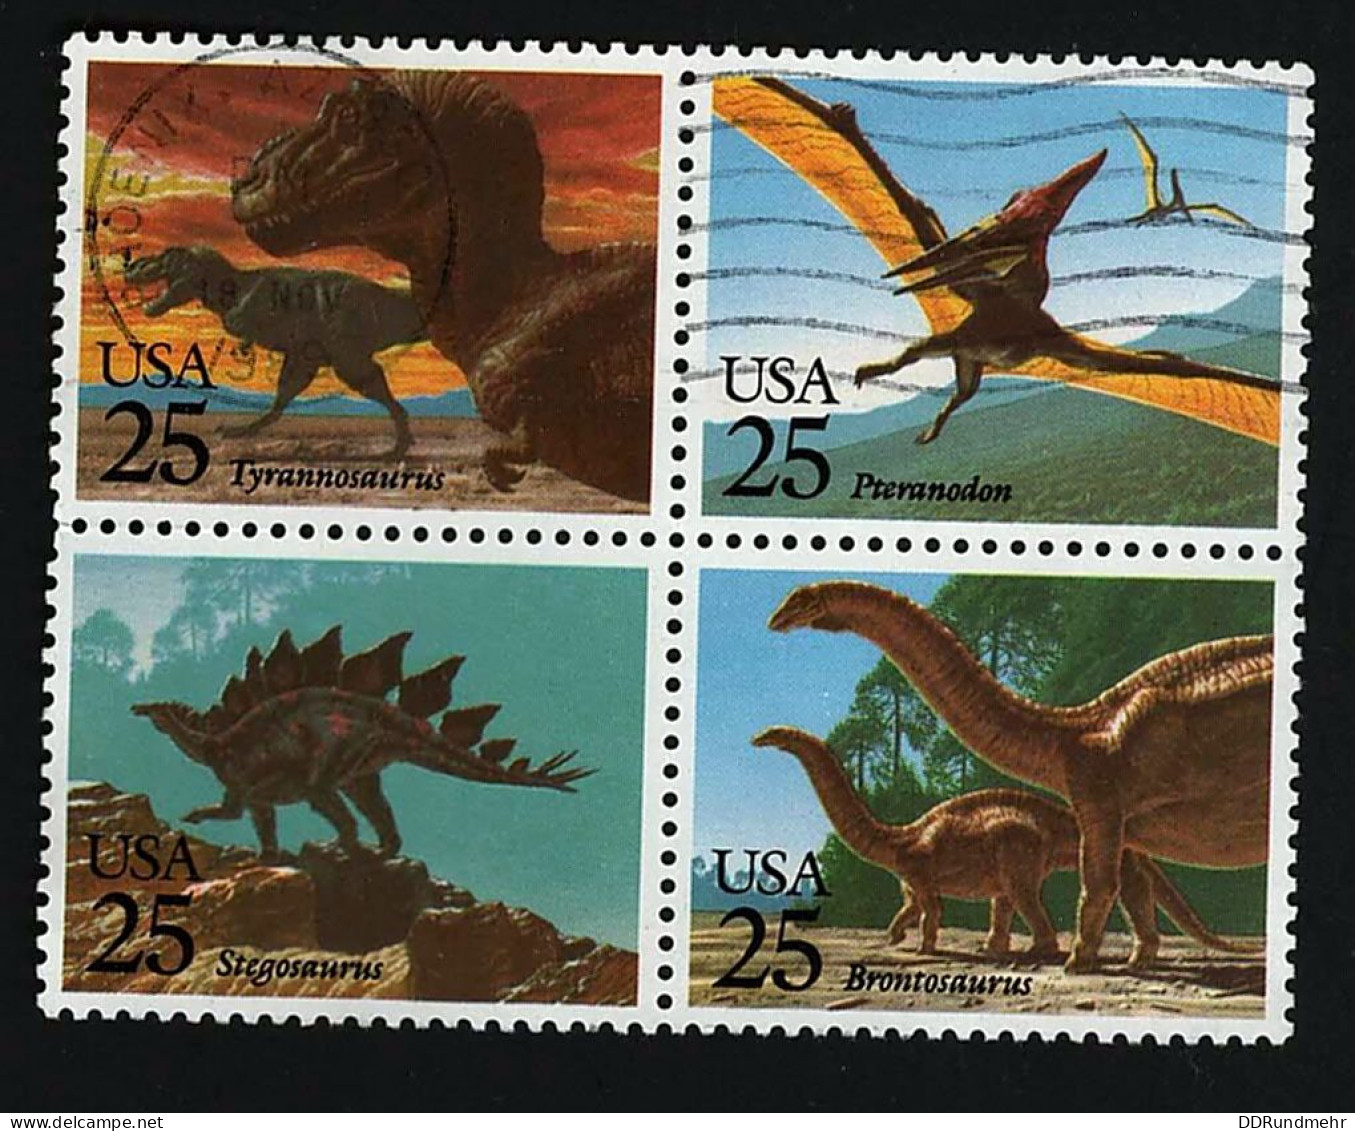 1989 Dinosaurs  Michel US 2051-2054 Stamp Number US 2425b Yvert Et Tellier US 1873-1876 Stanley Gibbons US 2407-241 Used - Used Stamps